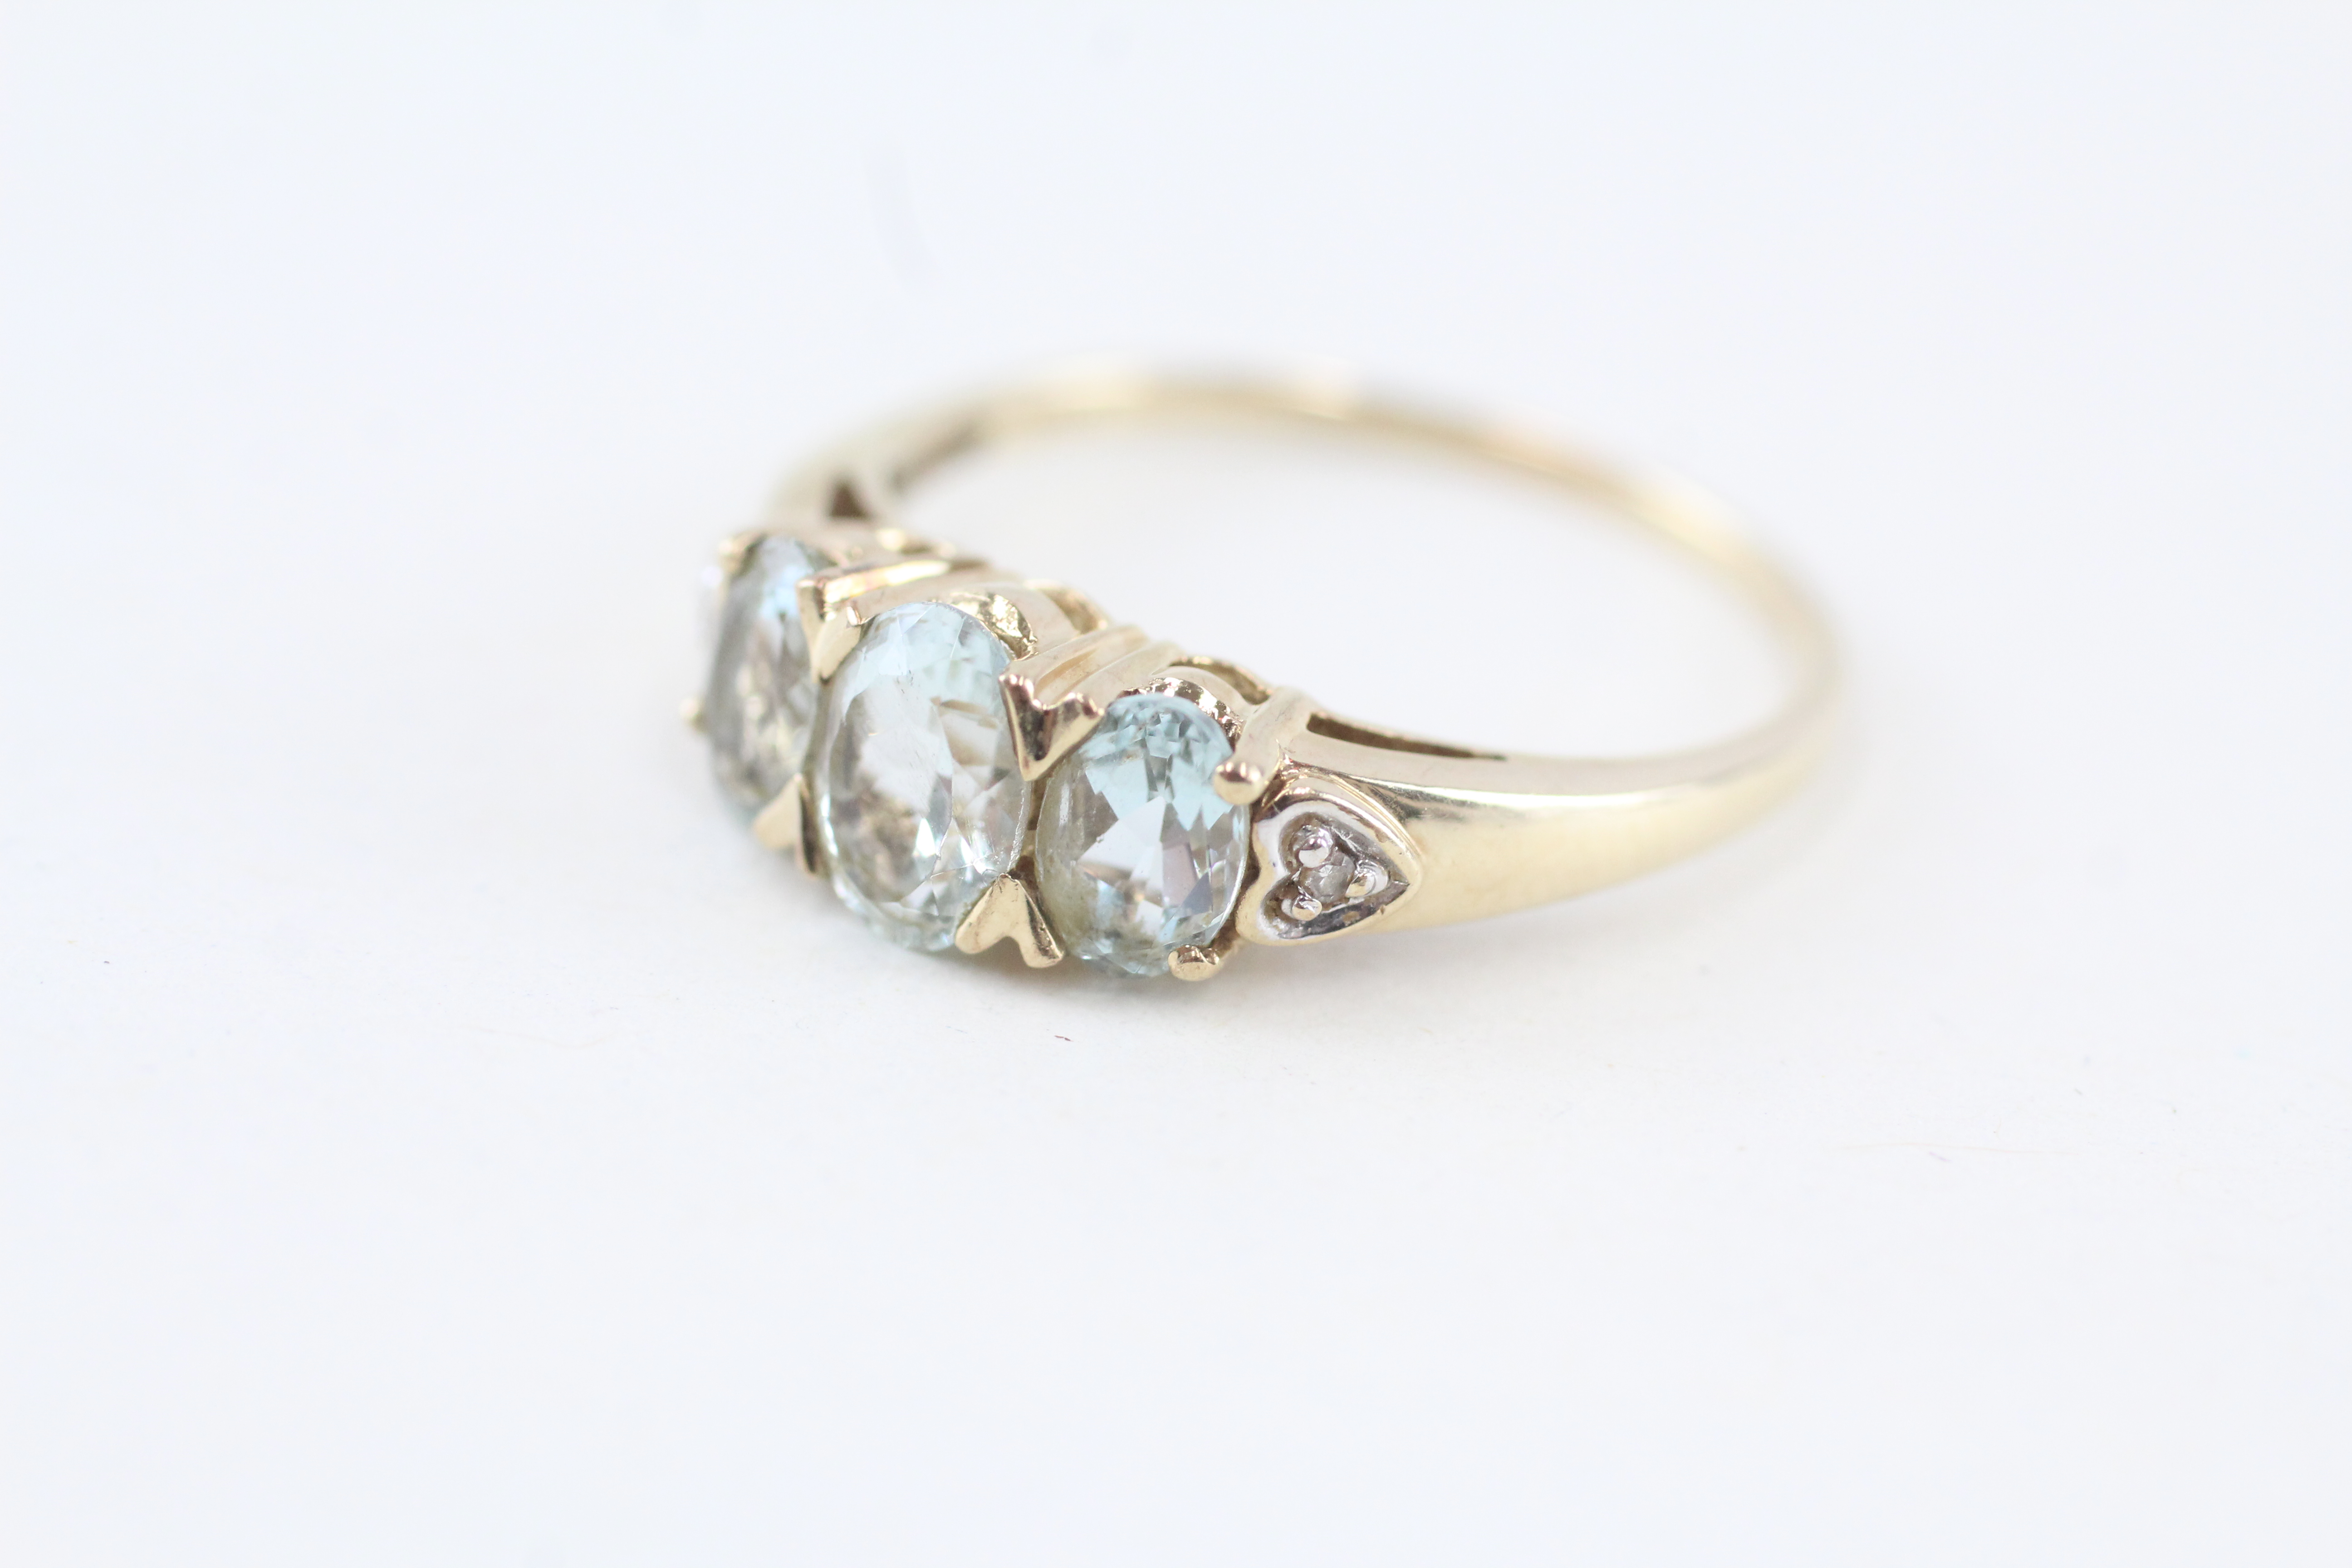 9ct gold aquamarine three stone ring with diamond set heart shoulders Size R 1/2 - 2.5 g - Image 2 of 5